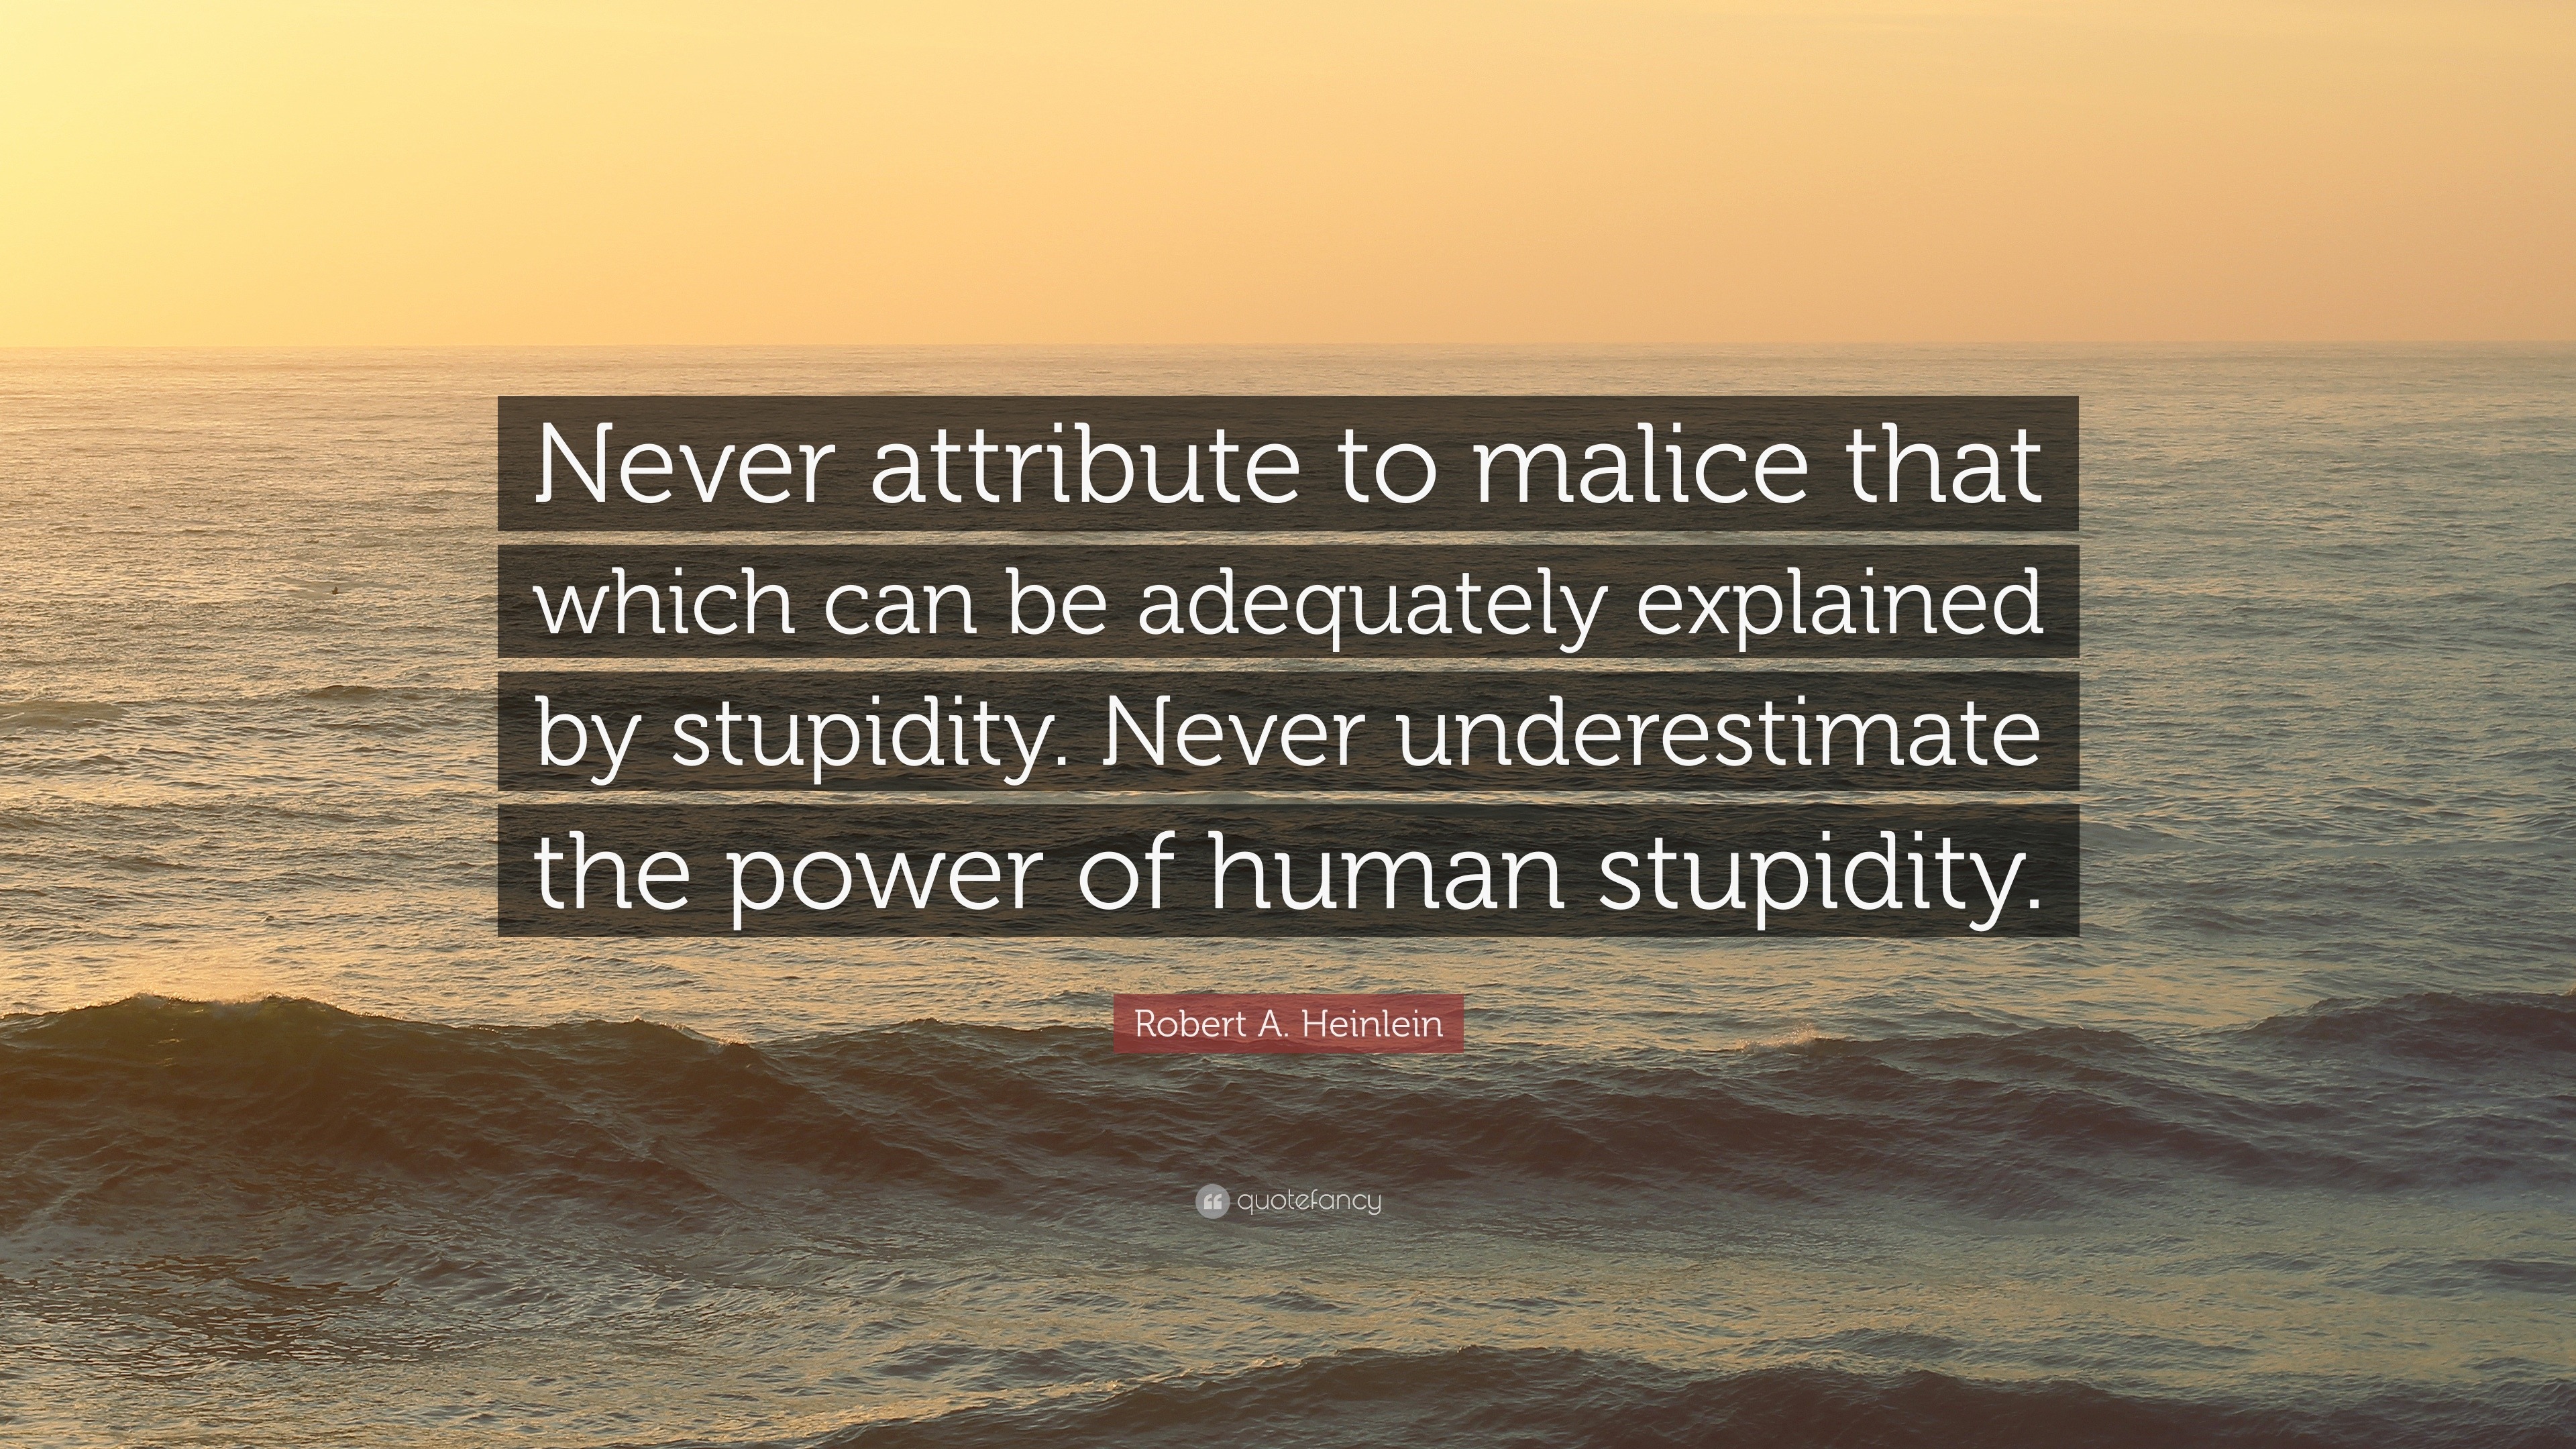 1816353-Robert-A-Heinlein-Quote-Never-attribute-to-malice-that-which-can.jpg